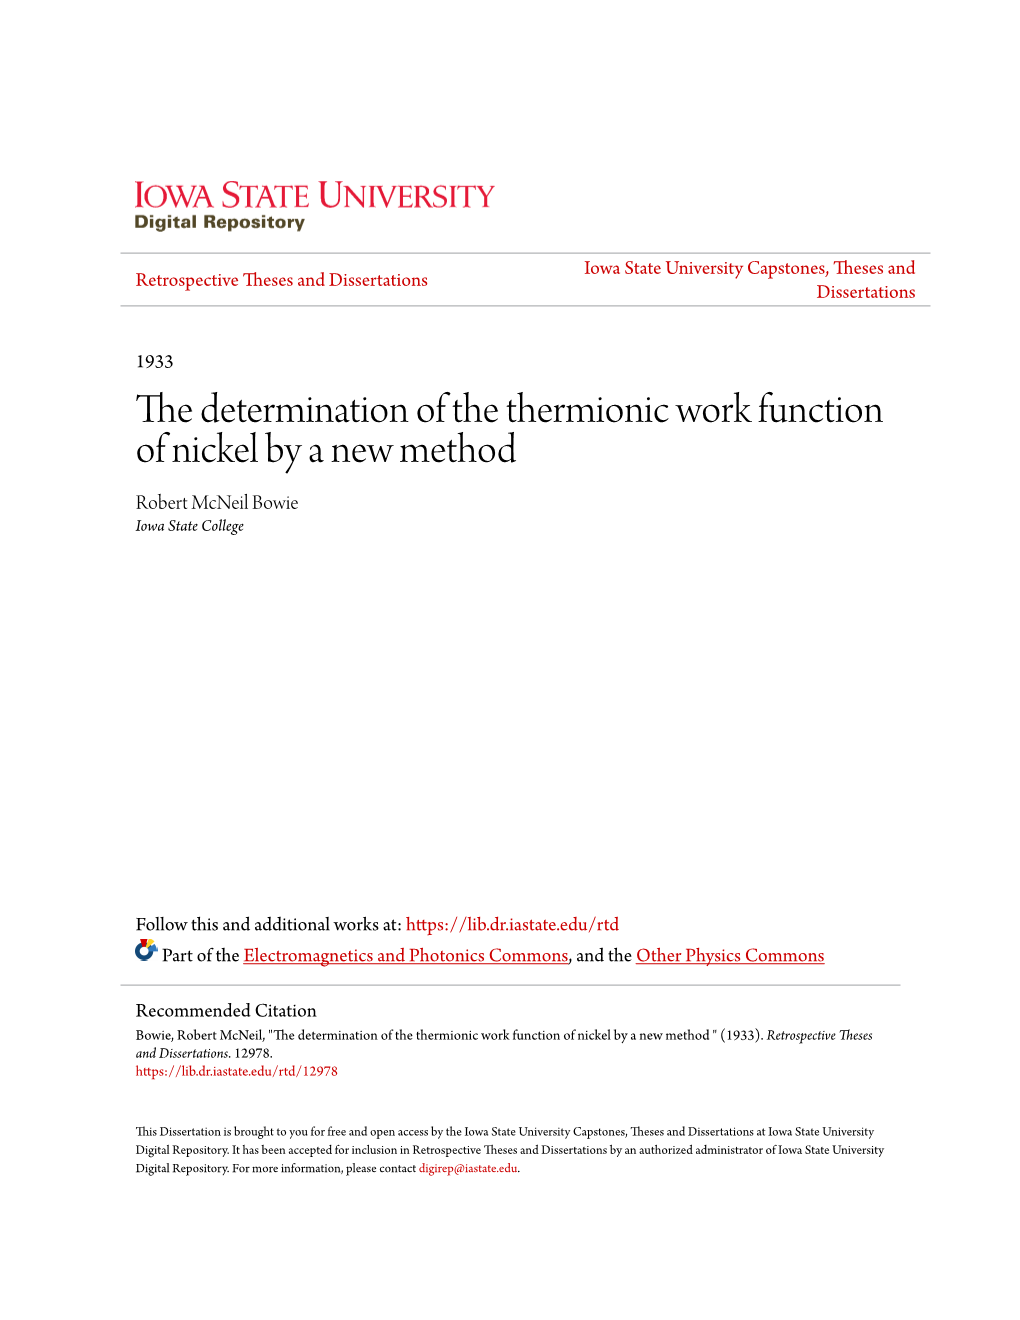 The Determination of the Thermionic Work Function of Nickel by a New Method Robert Mcneil Bowie Iowa State College